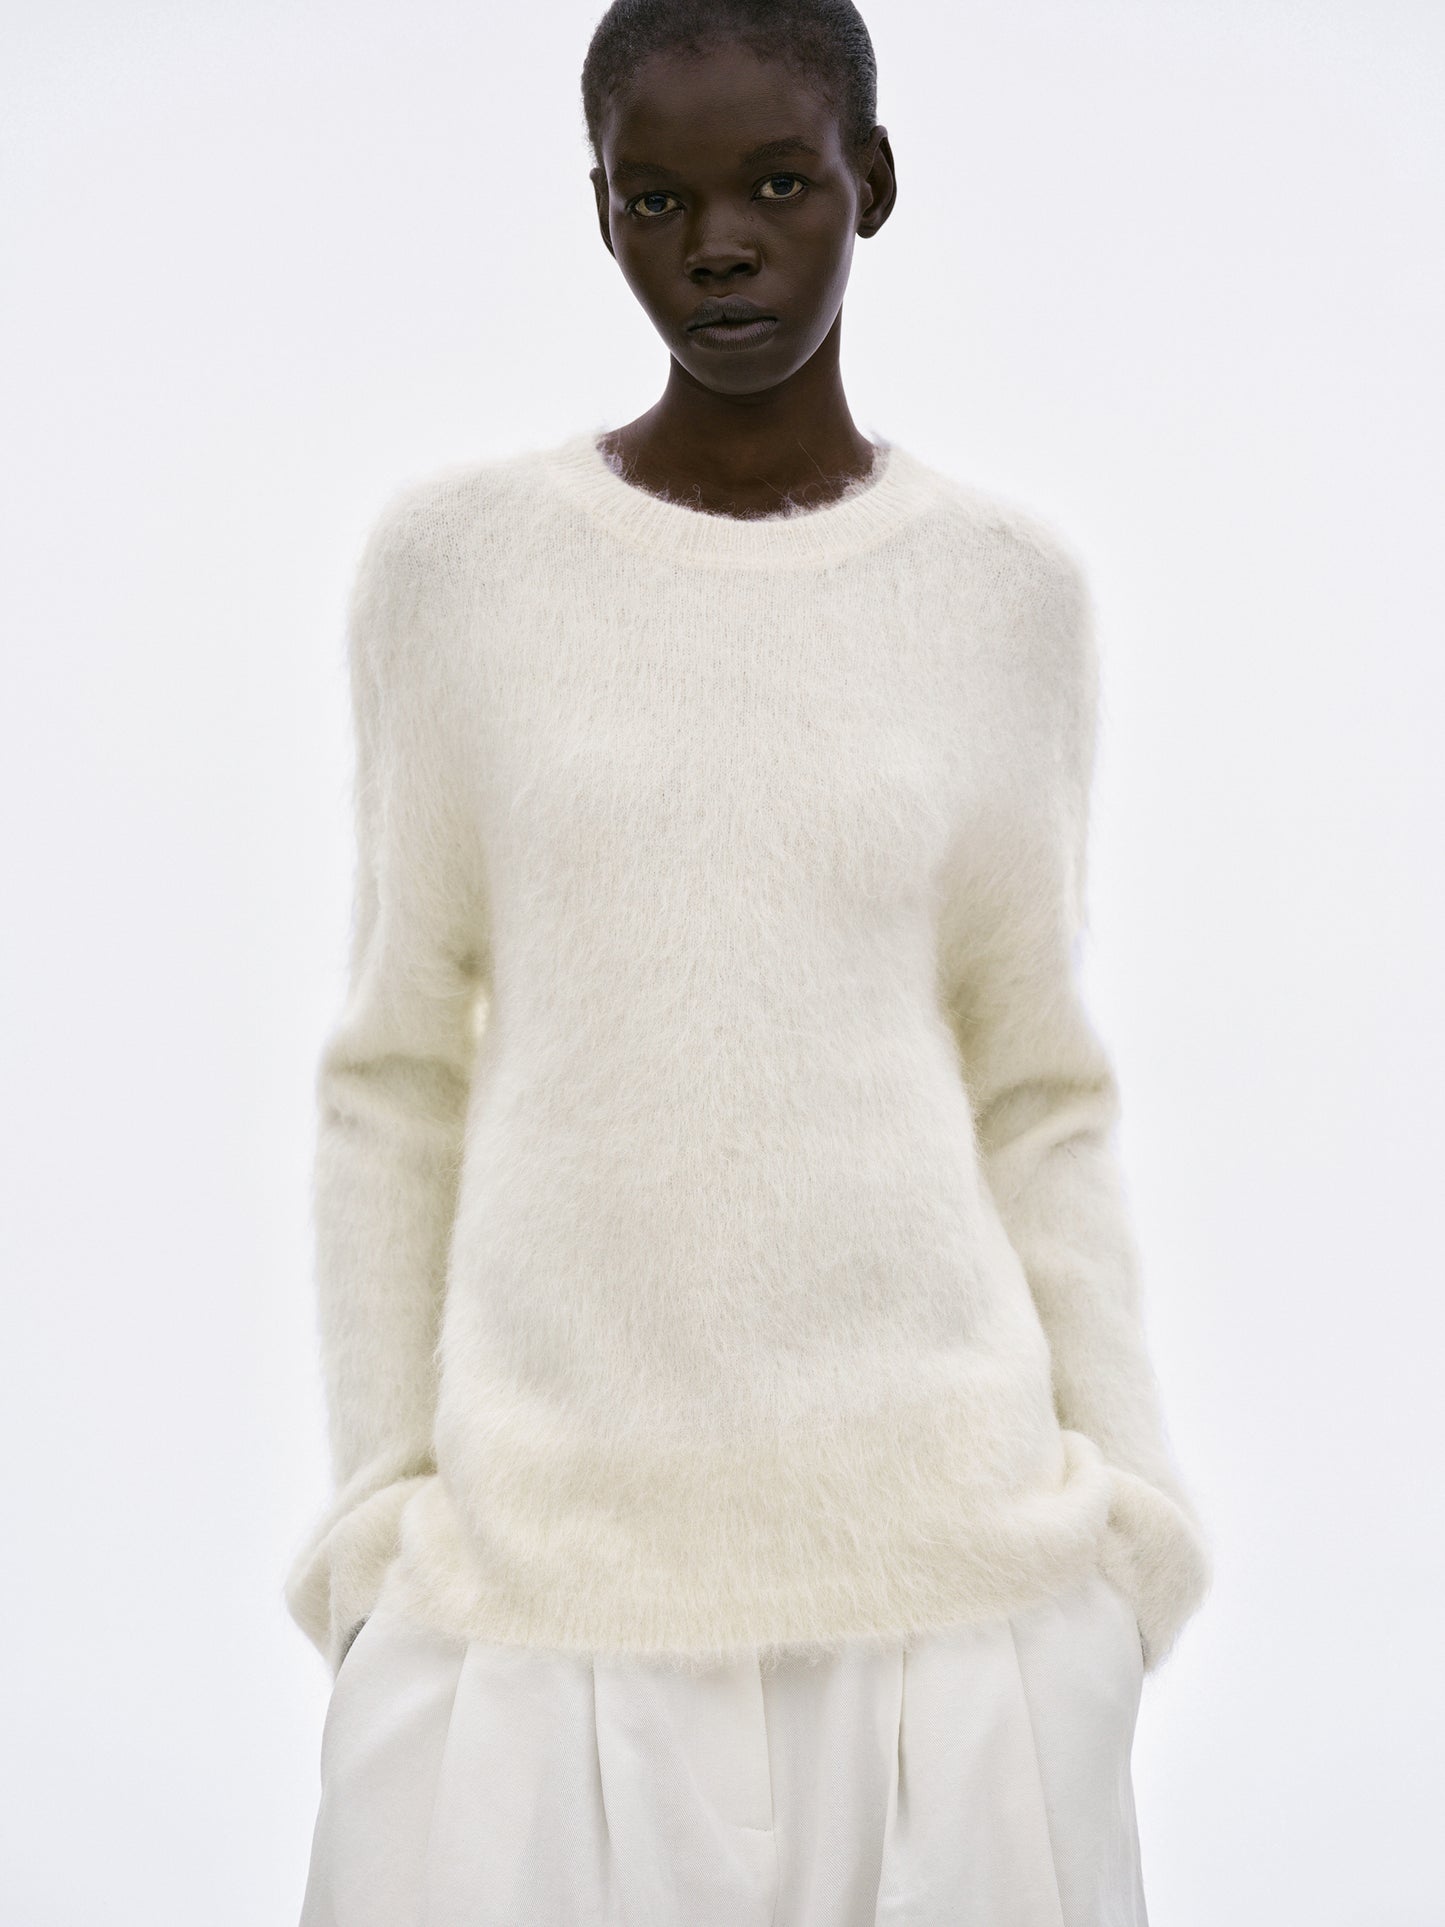 Brushed Camel Wool Pullover, Cream